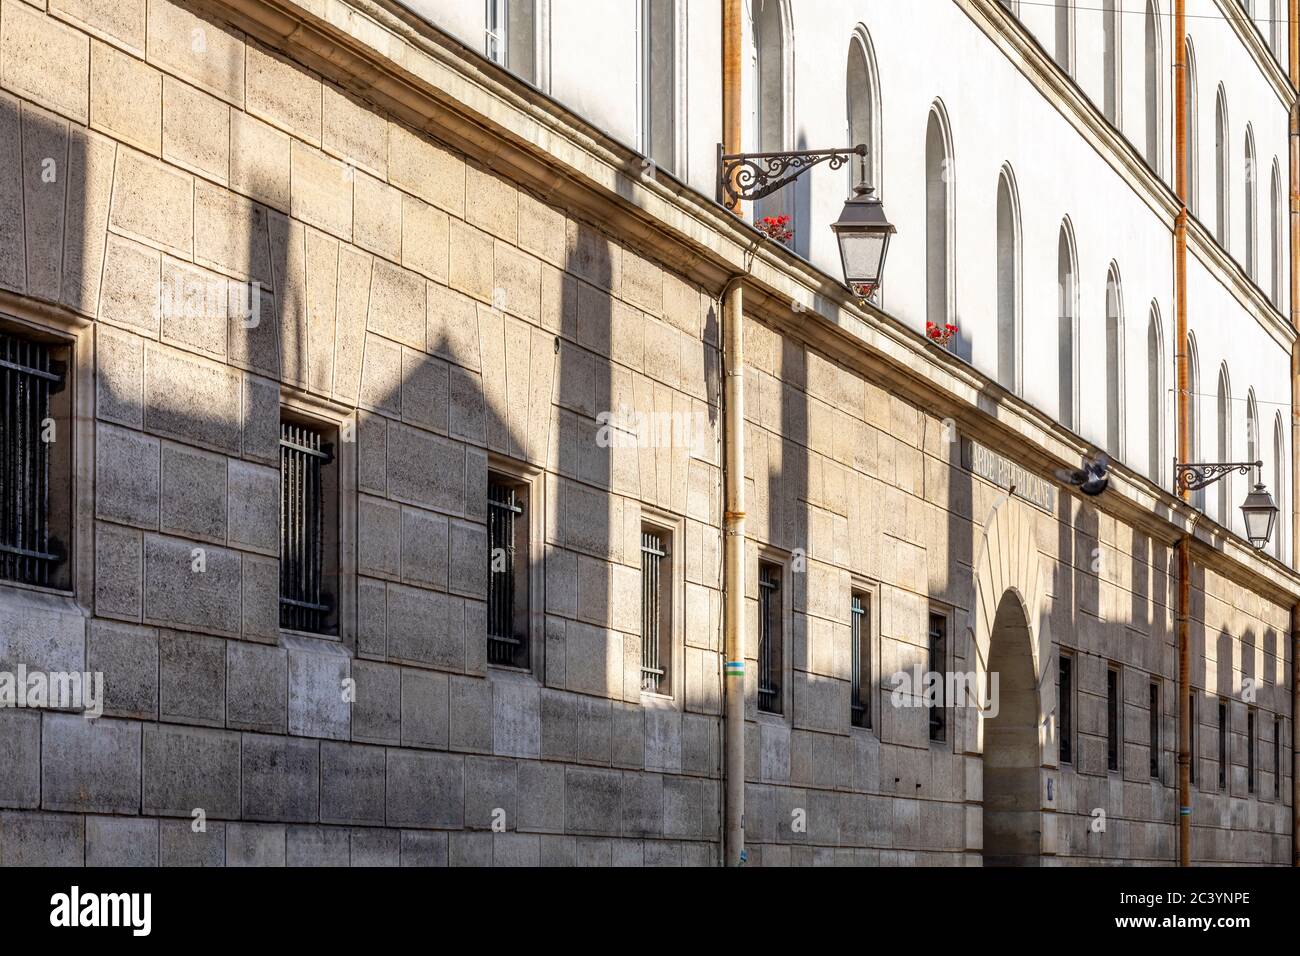 Paris, France - May 26, 2020: Light and shadows on buildings in Mouffetard district in Paris Stock Photo